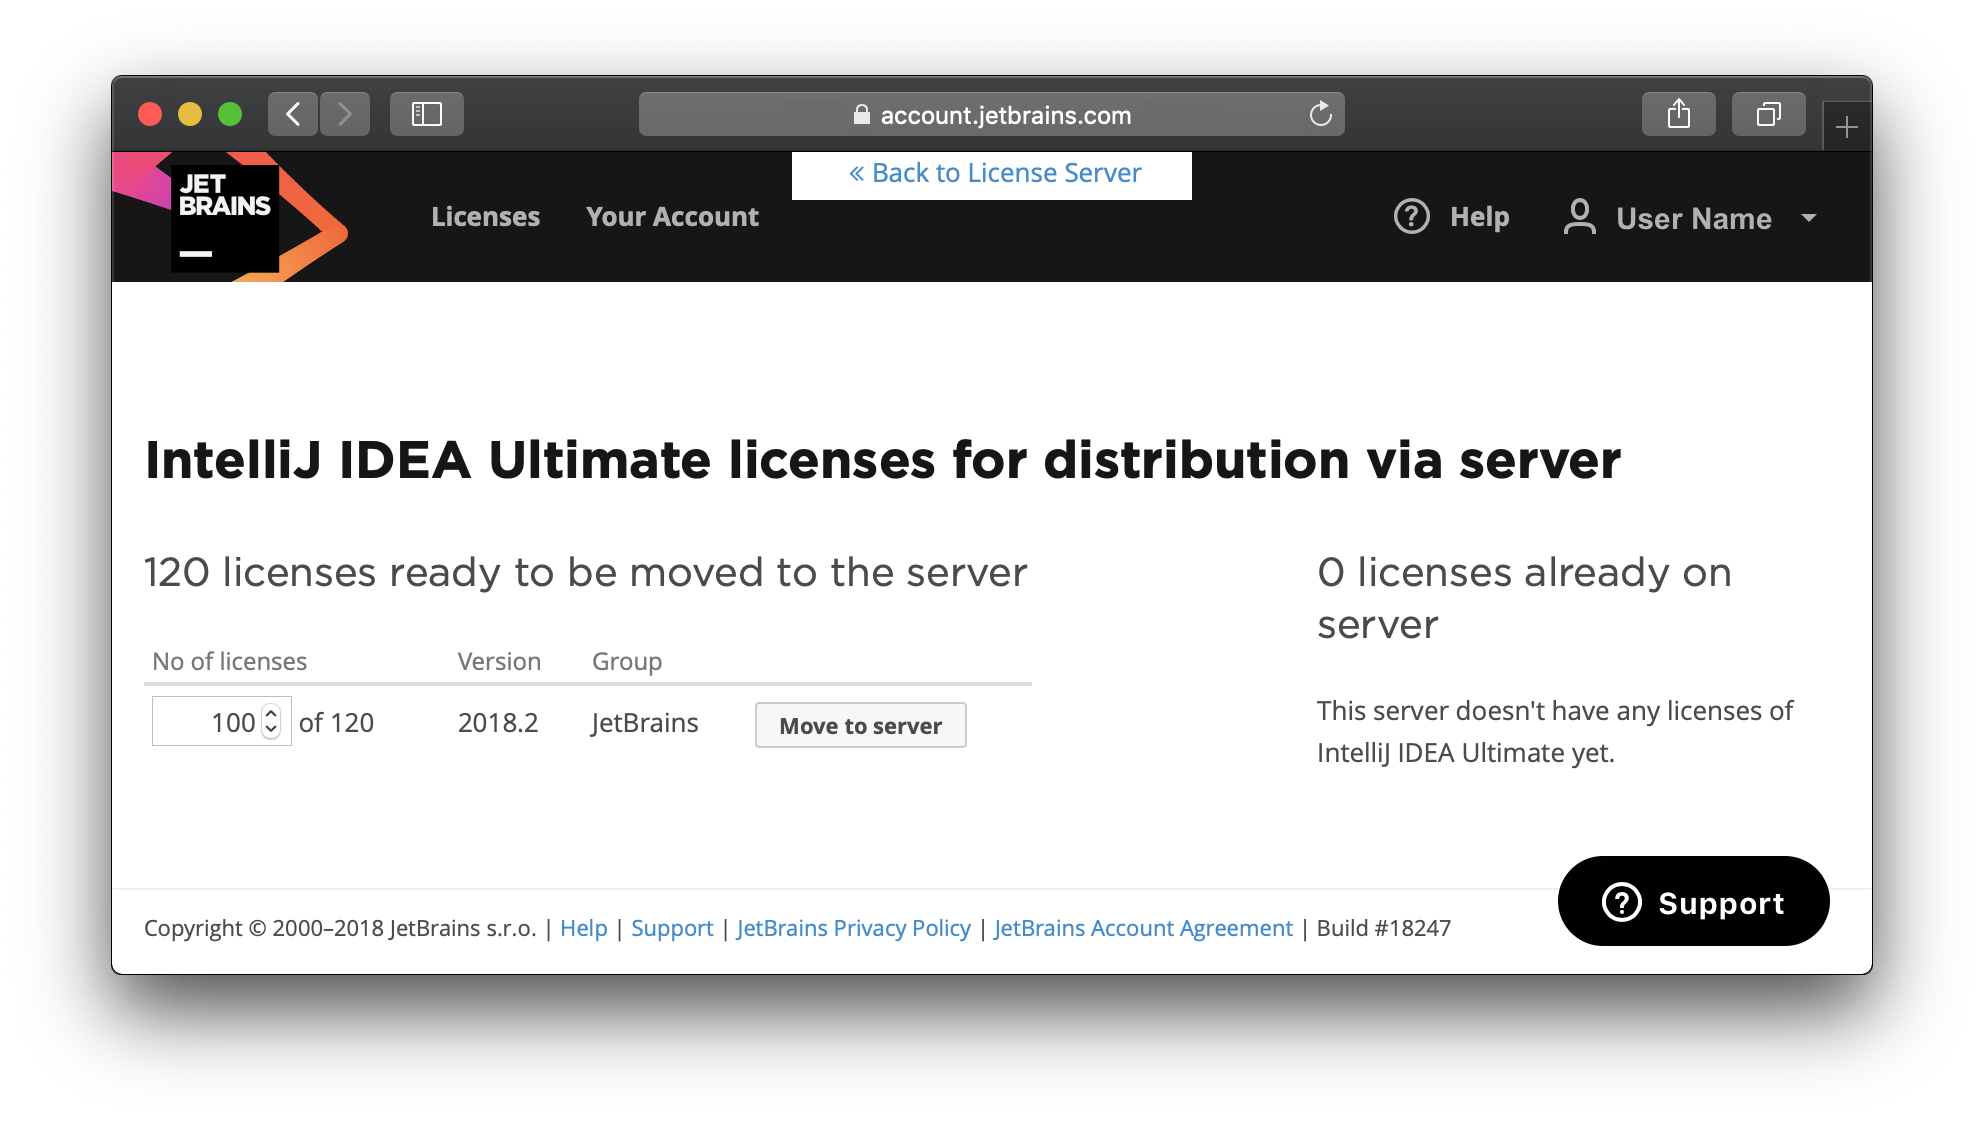 Specify how many licenses to make available through the License Server